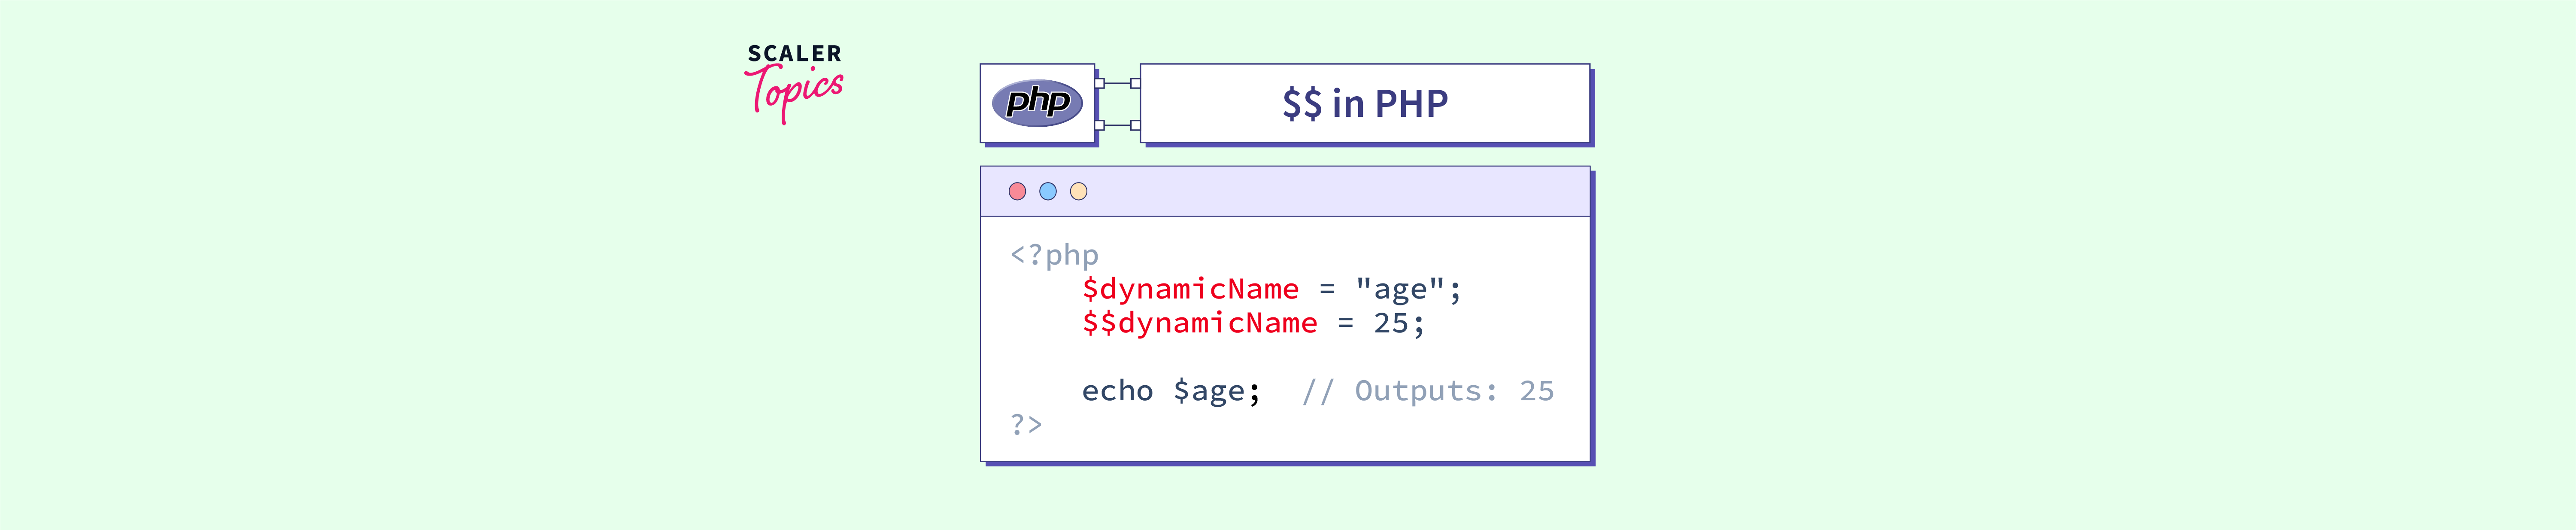 What is $$ in PHP? - Scaler Topics